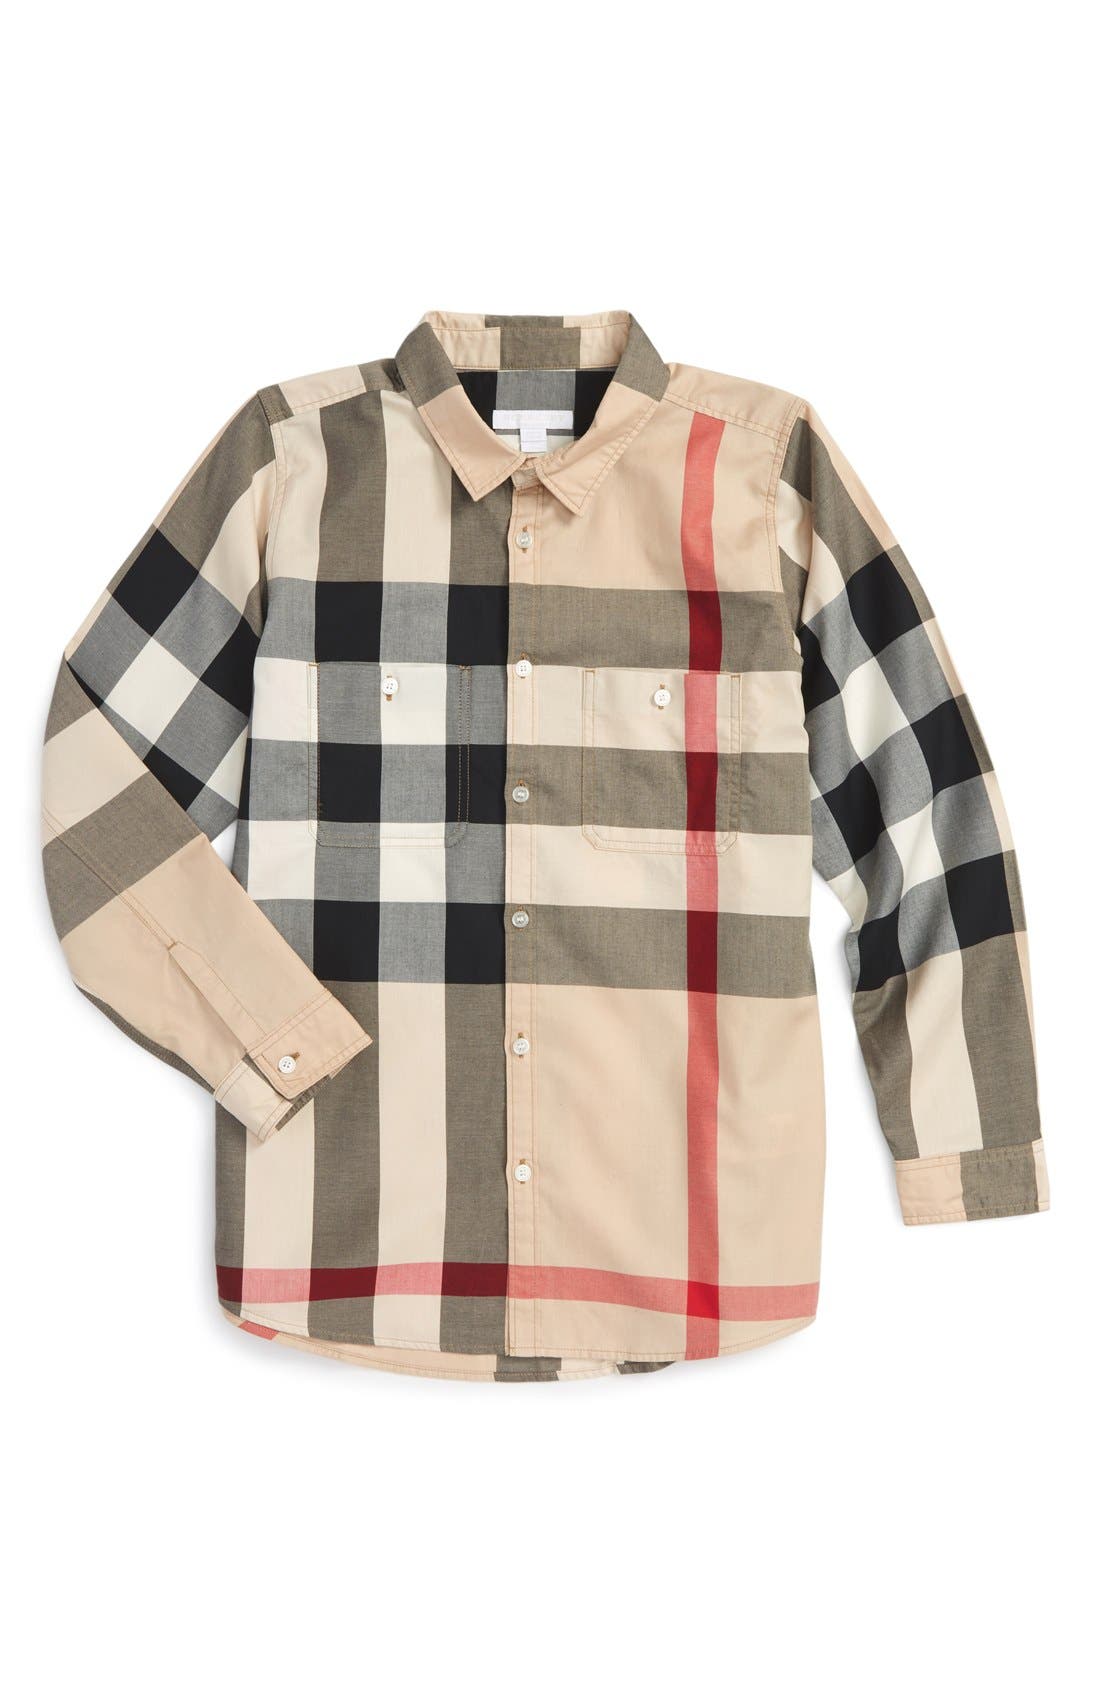 burberry for baby boy on sale